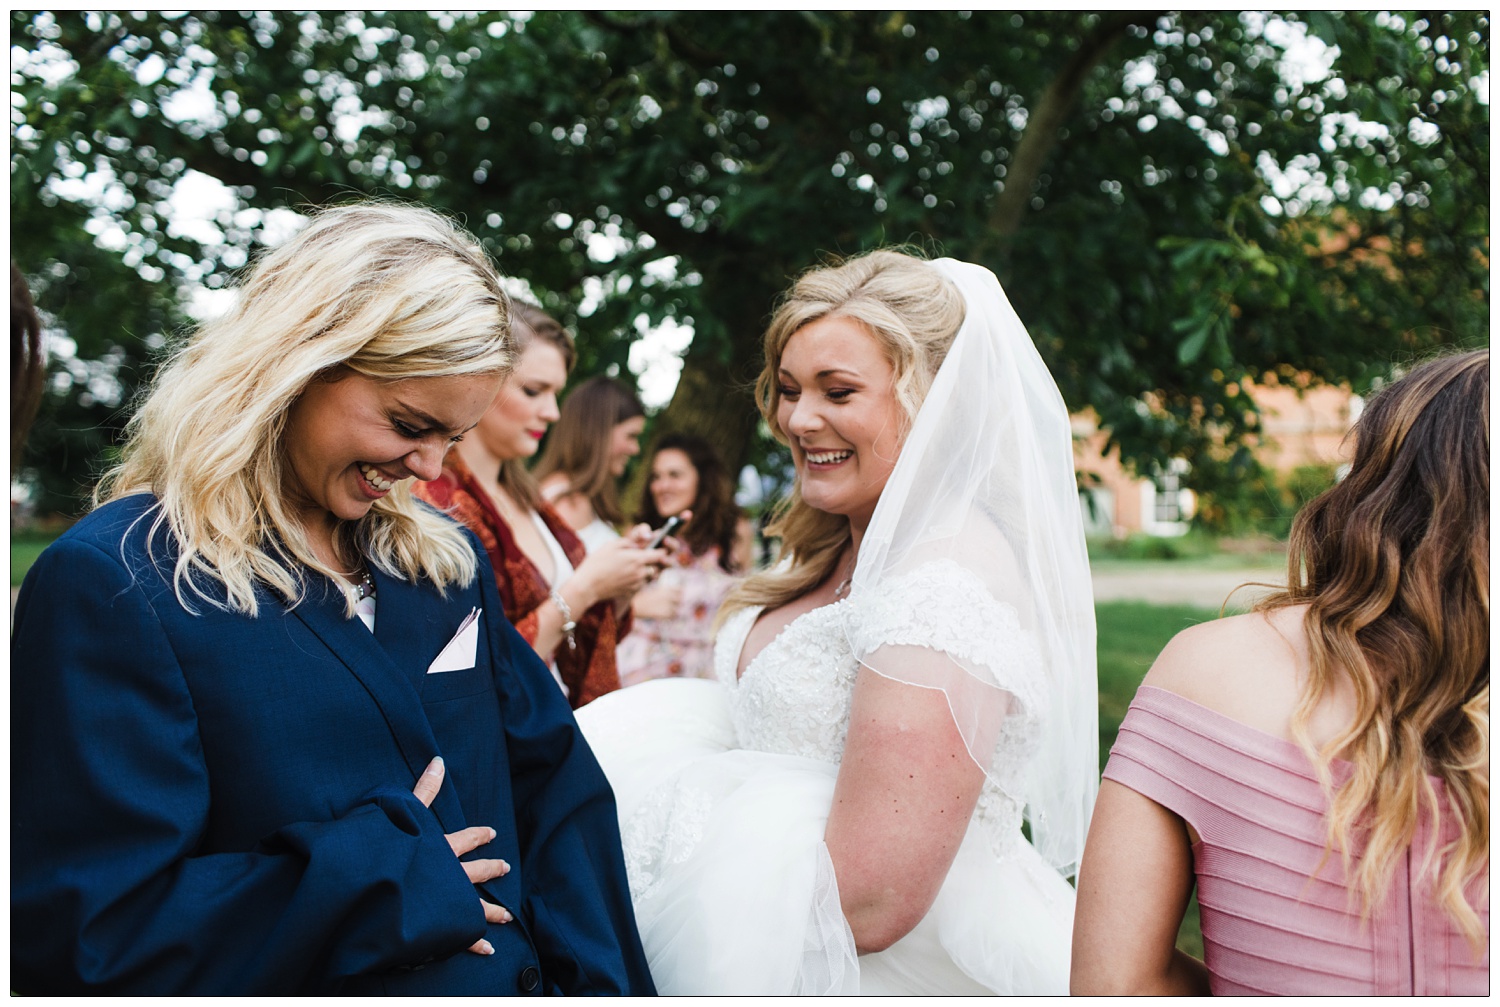 Bride is laughing with her friend. Her friend has put on a man's dark blue jacket to keep warm.